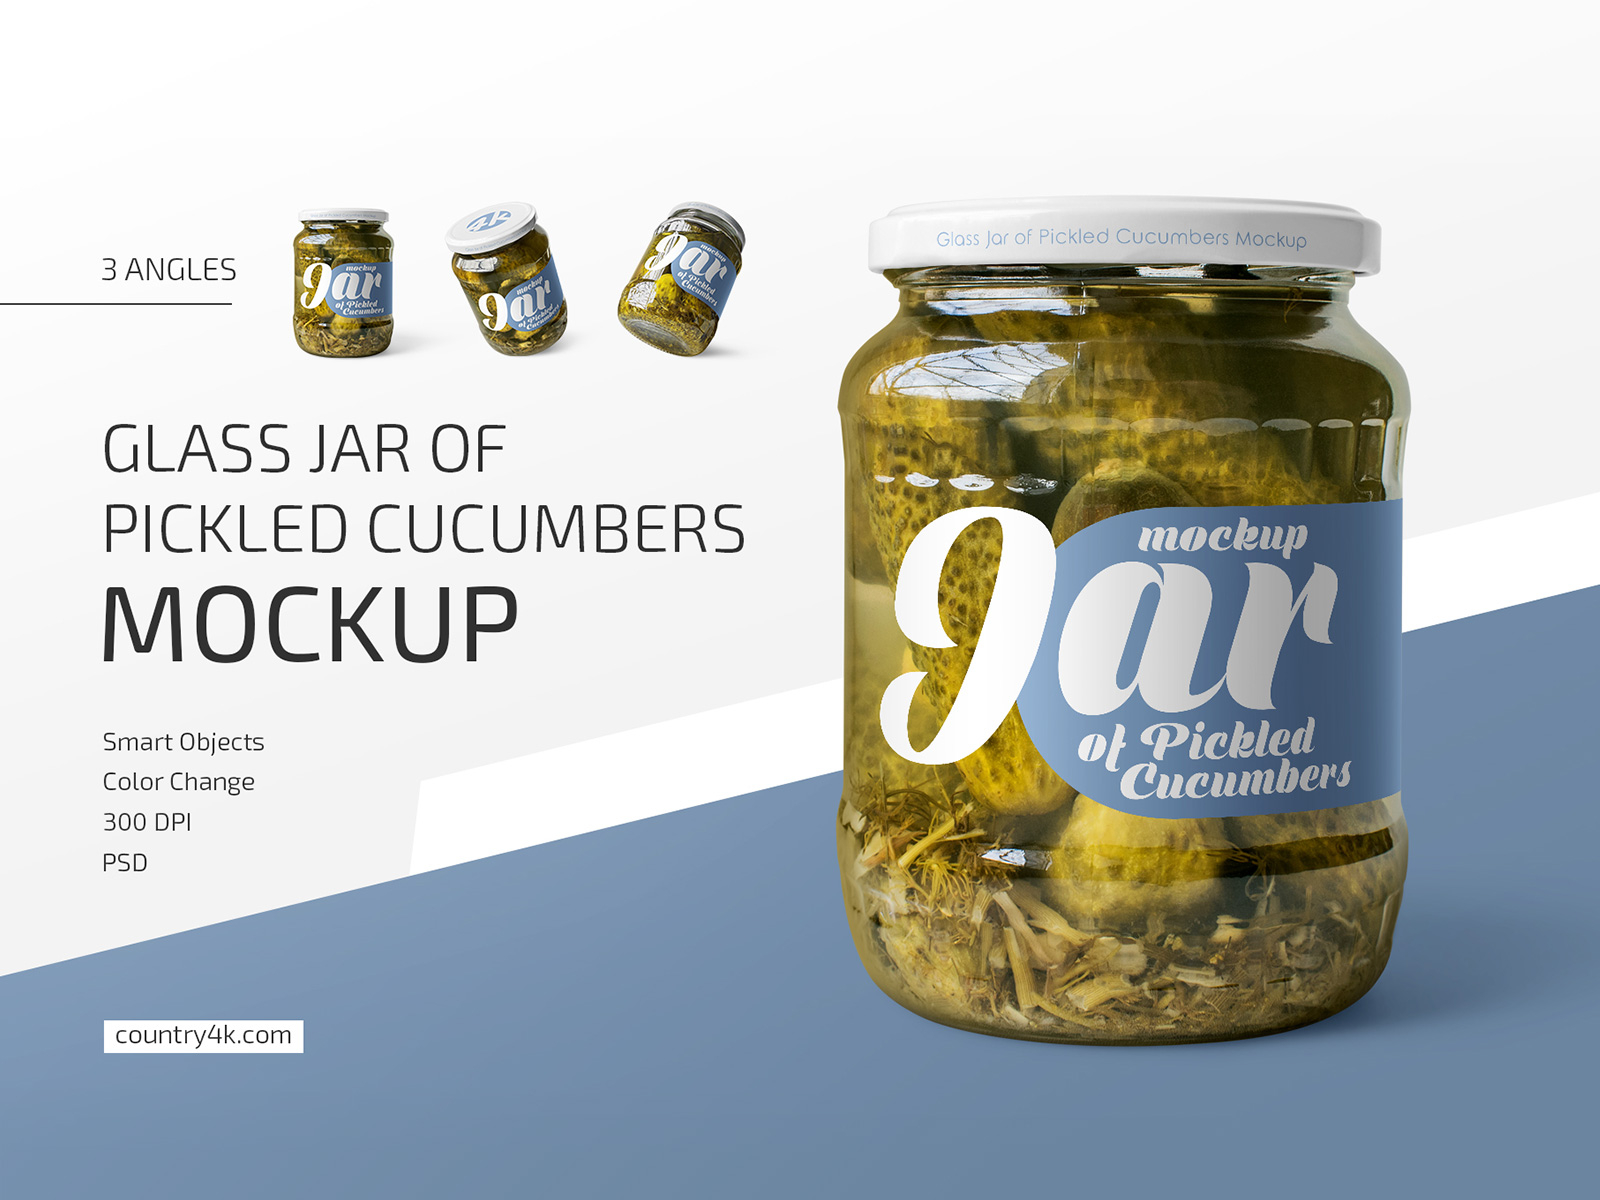 Download Glass Jar of Pickled Cucumbers Mockup Set by Country4k on Dribbble